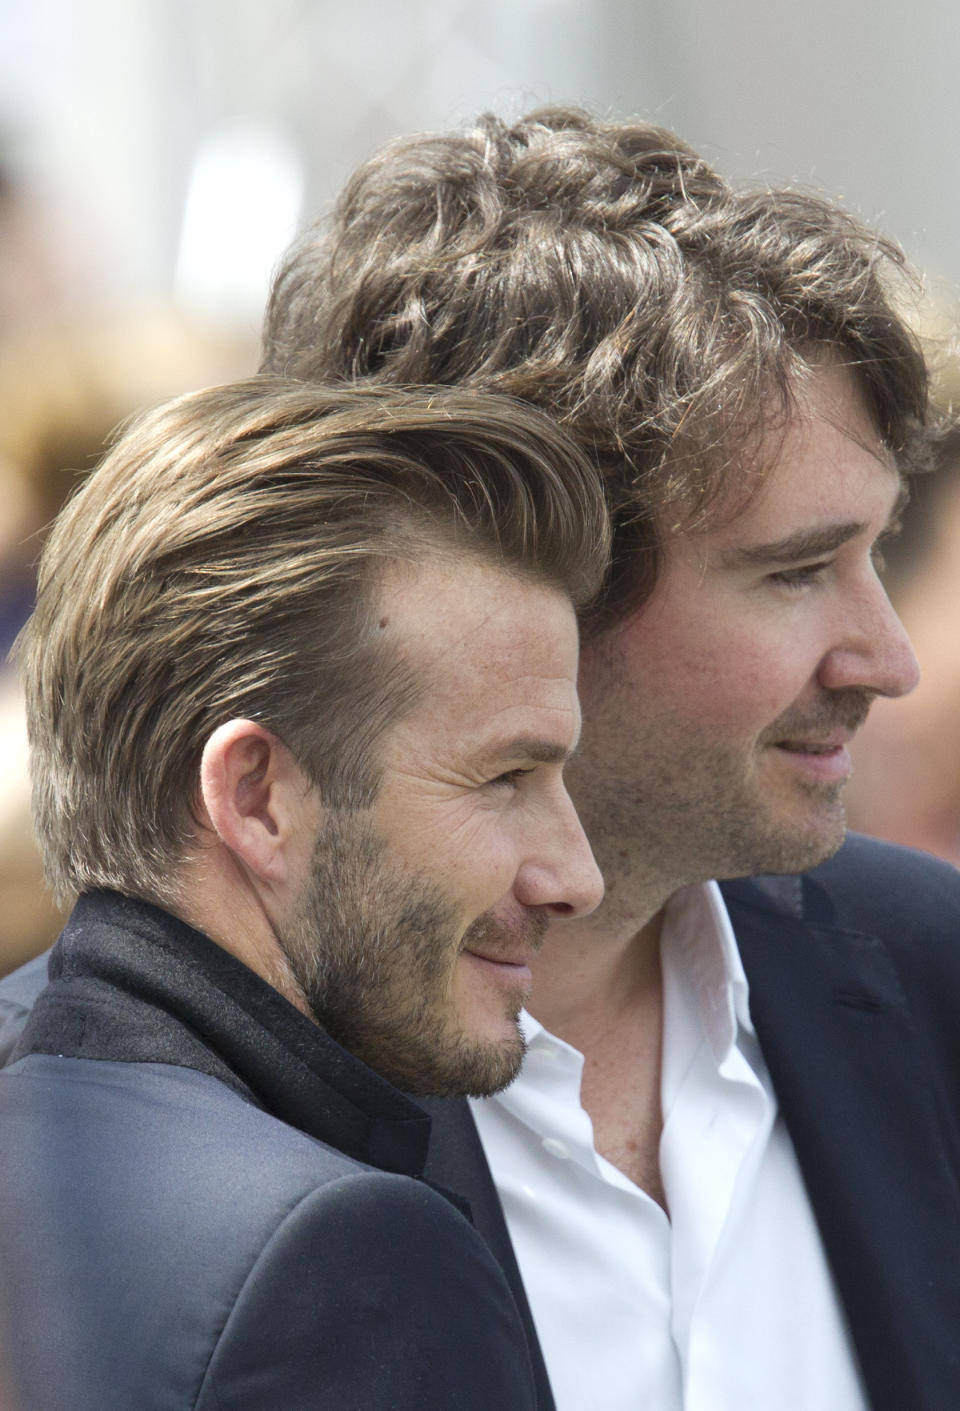 Former British soccer star David Beckham, left, and Antoine Arnault, a member of French luxury brand LVMH board of chairman, pose for photographers during Vuitton's Spring-Summer 2014 men's collection presented Thursday, June 27, 2013 in Paris. (AP Photo/Jacques Brinon)